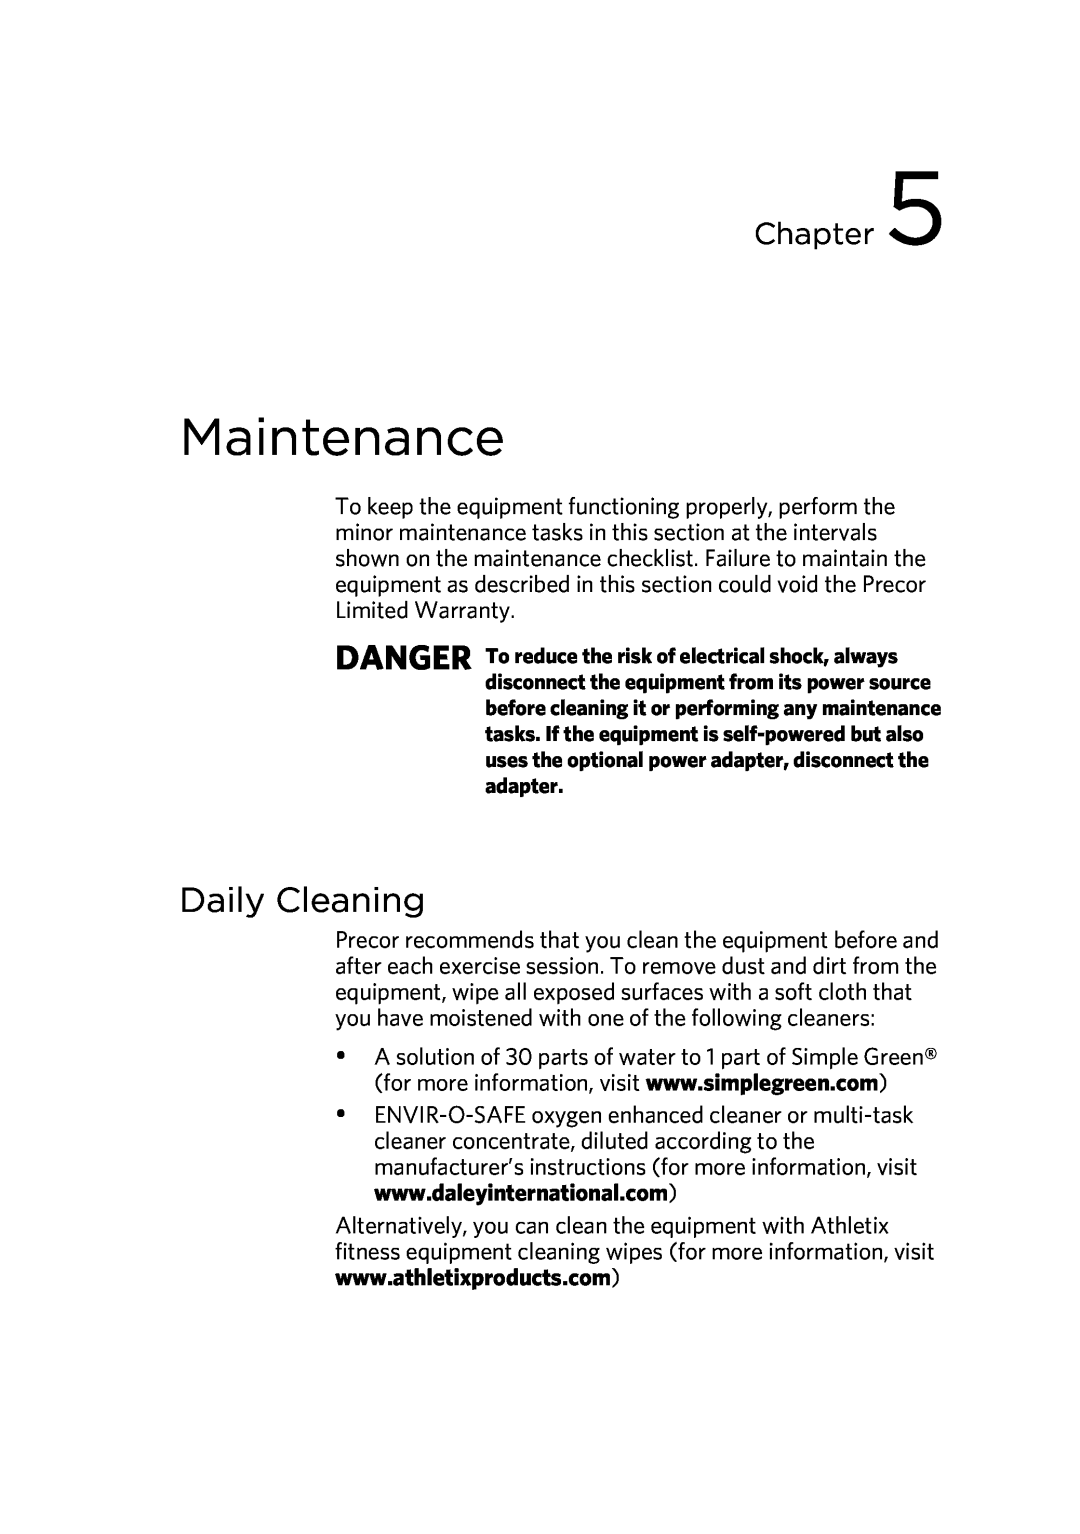 Precor 300753-201 manual Daily Cleaning, Maintenance, Chapter 